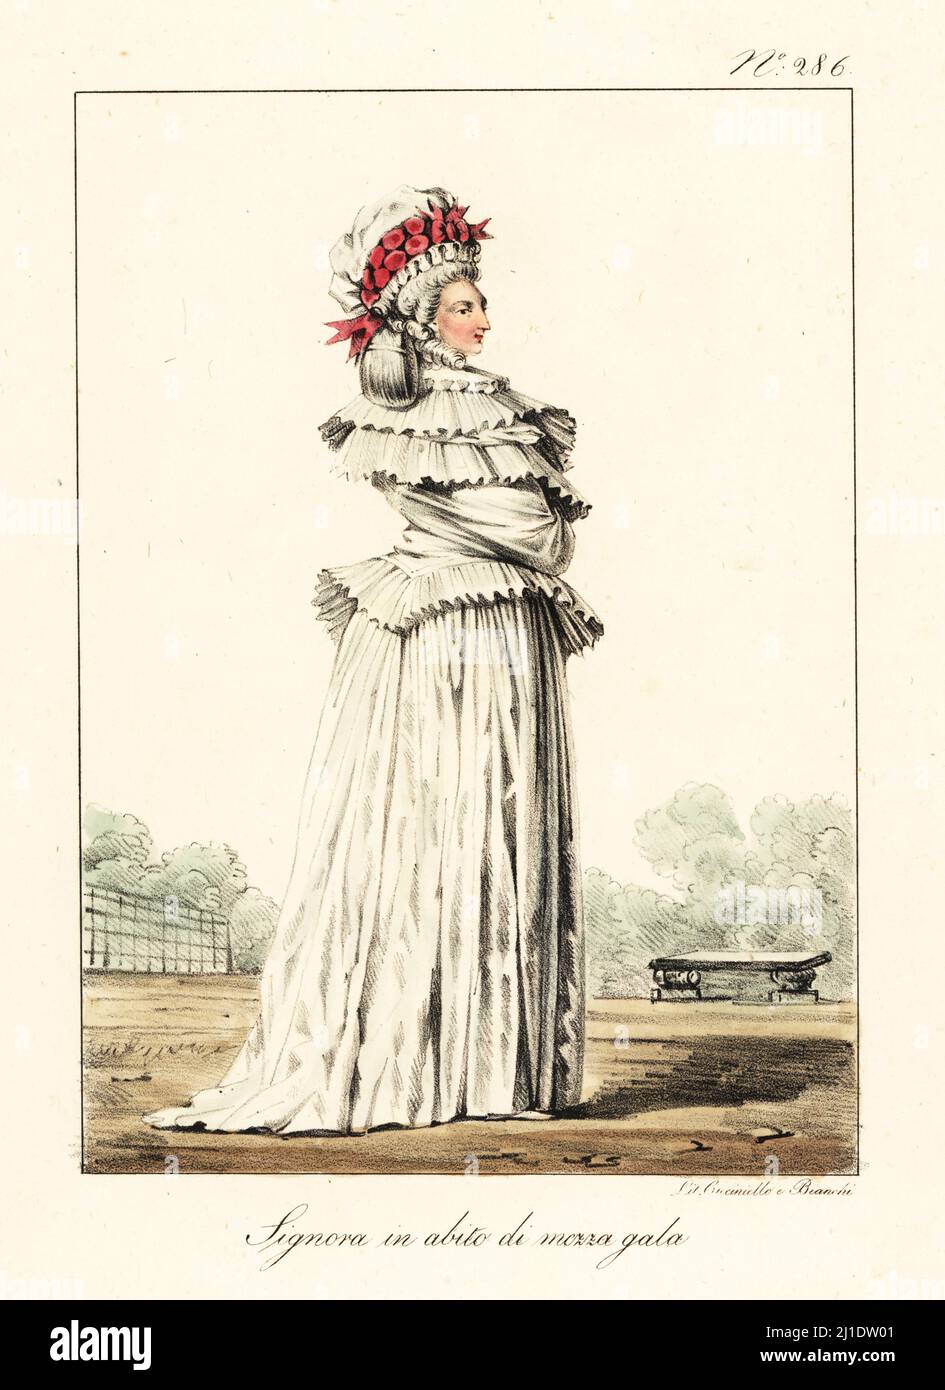 French woman in semi-formal costume, late 18th century. Bonnet decorated with frills and roses, shawl and gown adorned with frills and ruches. Costume de Dame, demi-parure. Handcoloured lithograph by Lorenzo Bianchi and Domenico Cuciniello after Hippolyte Lecomte from Costumi civili e militari della monarchia francese dal 1200 al 1820, Naples, 1825. Italian edition of Lecomte’s Civilian and military costumes of the French monarchy from 1200 to 1820. Stock Photo